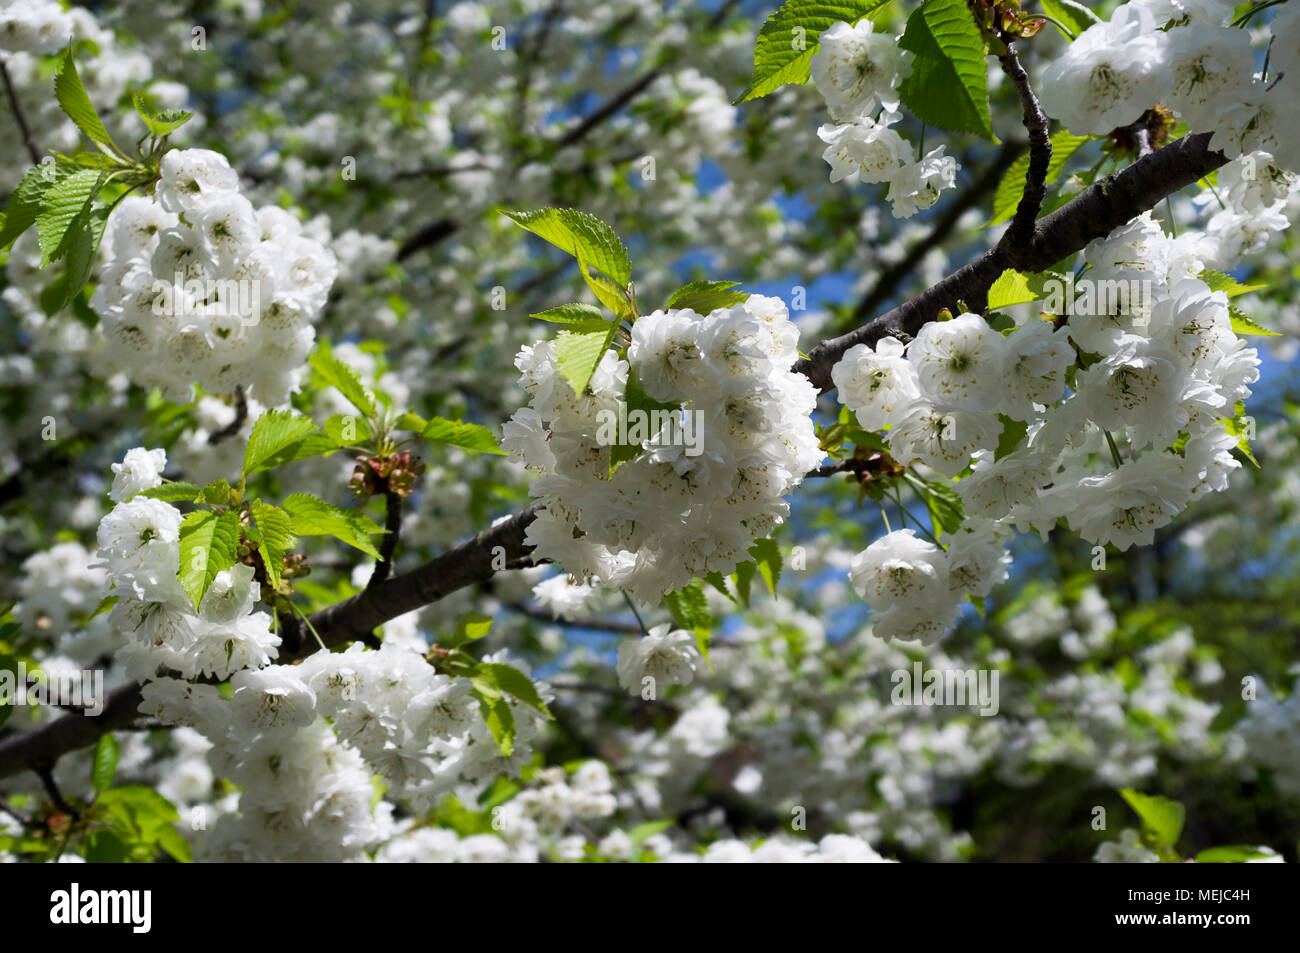 Blossom on trees in London, UK Stock Photo